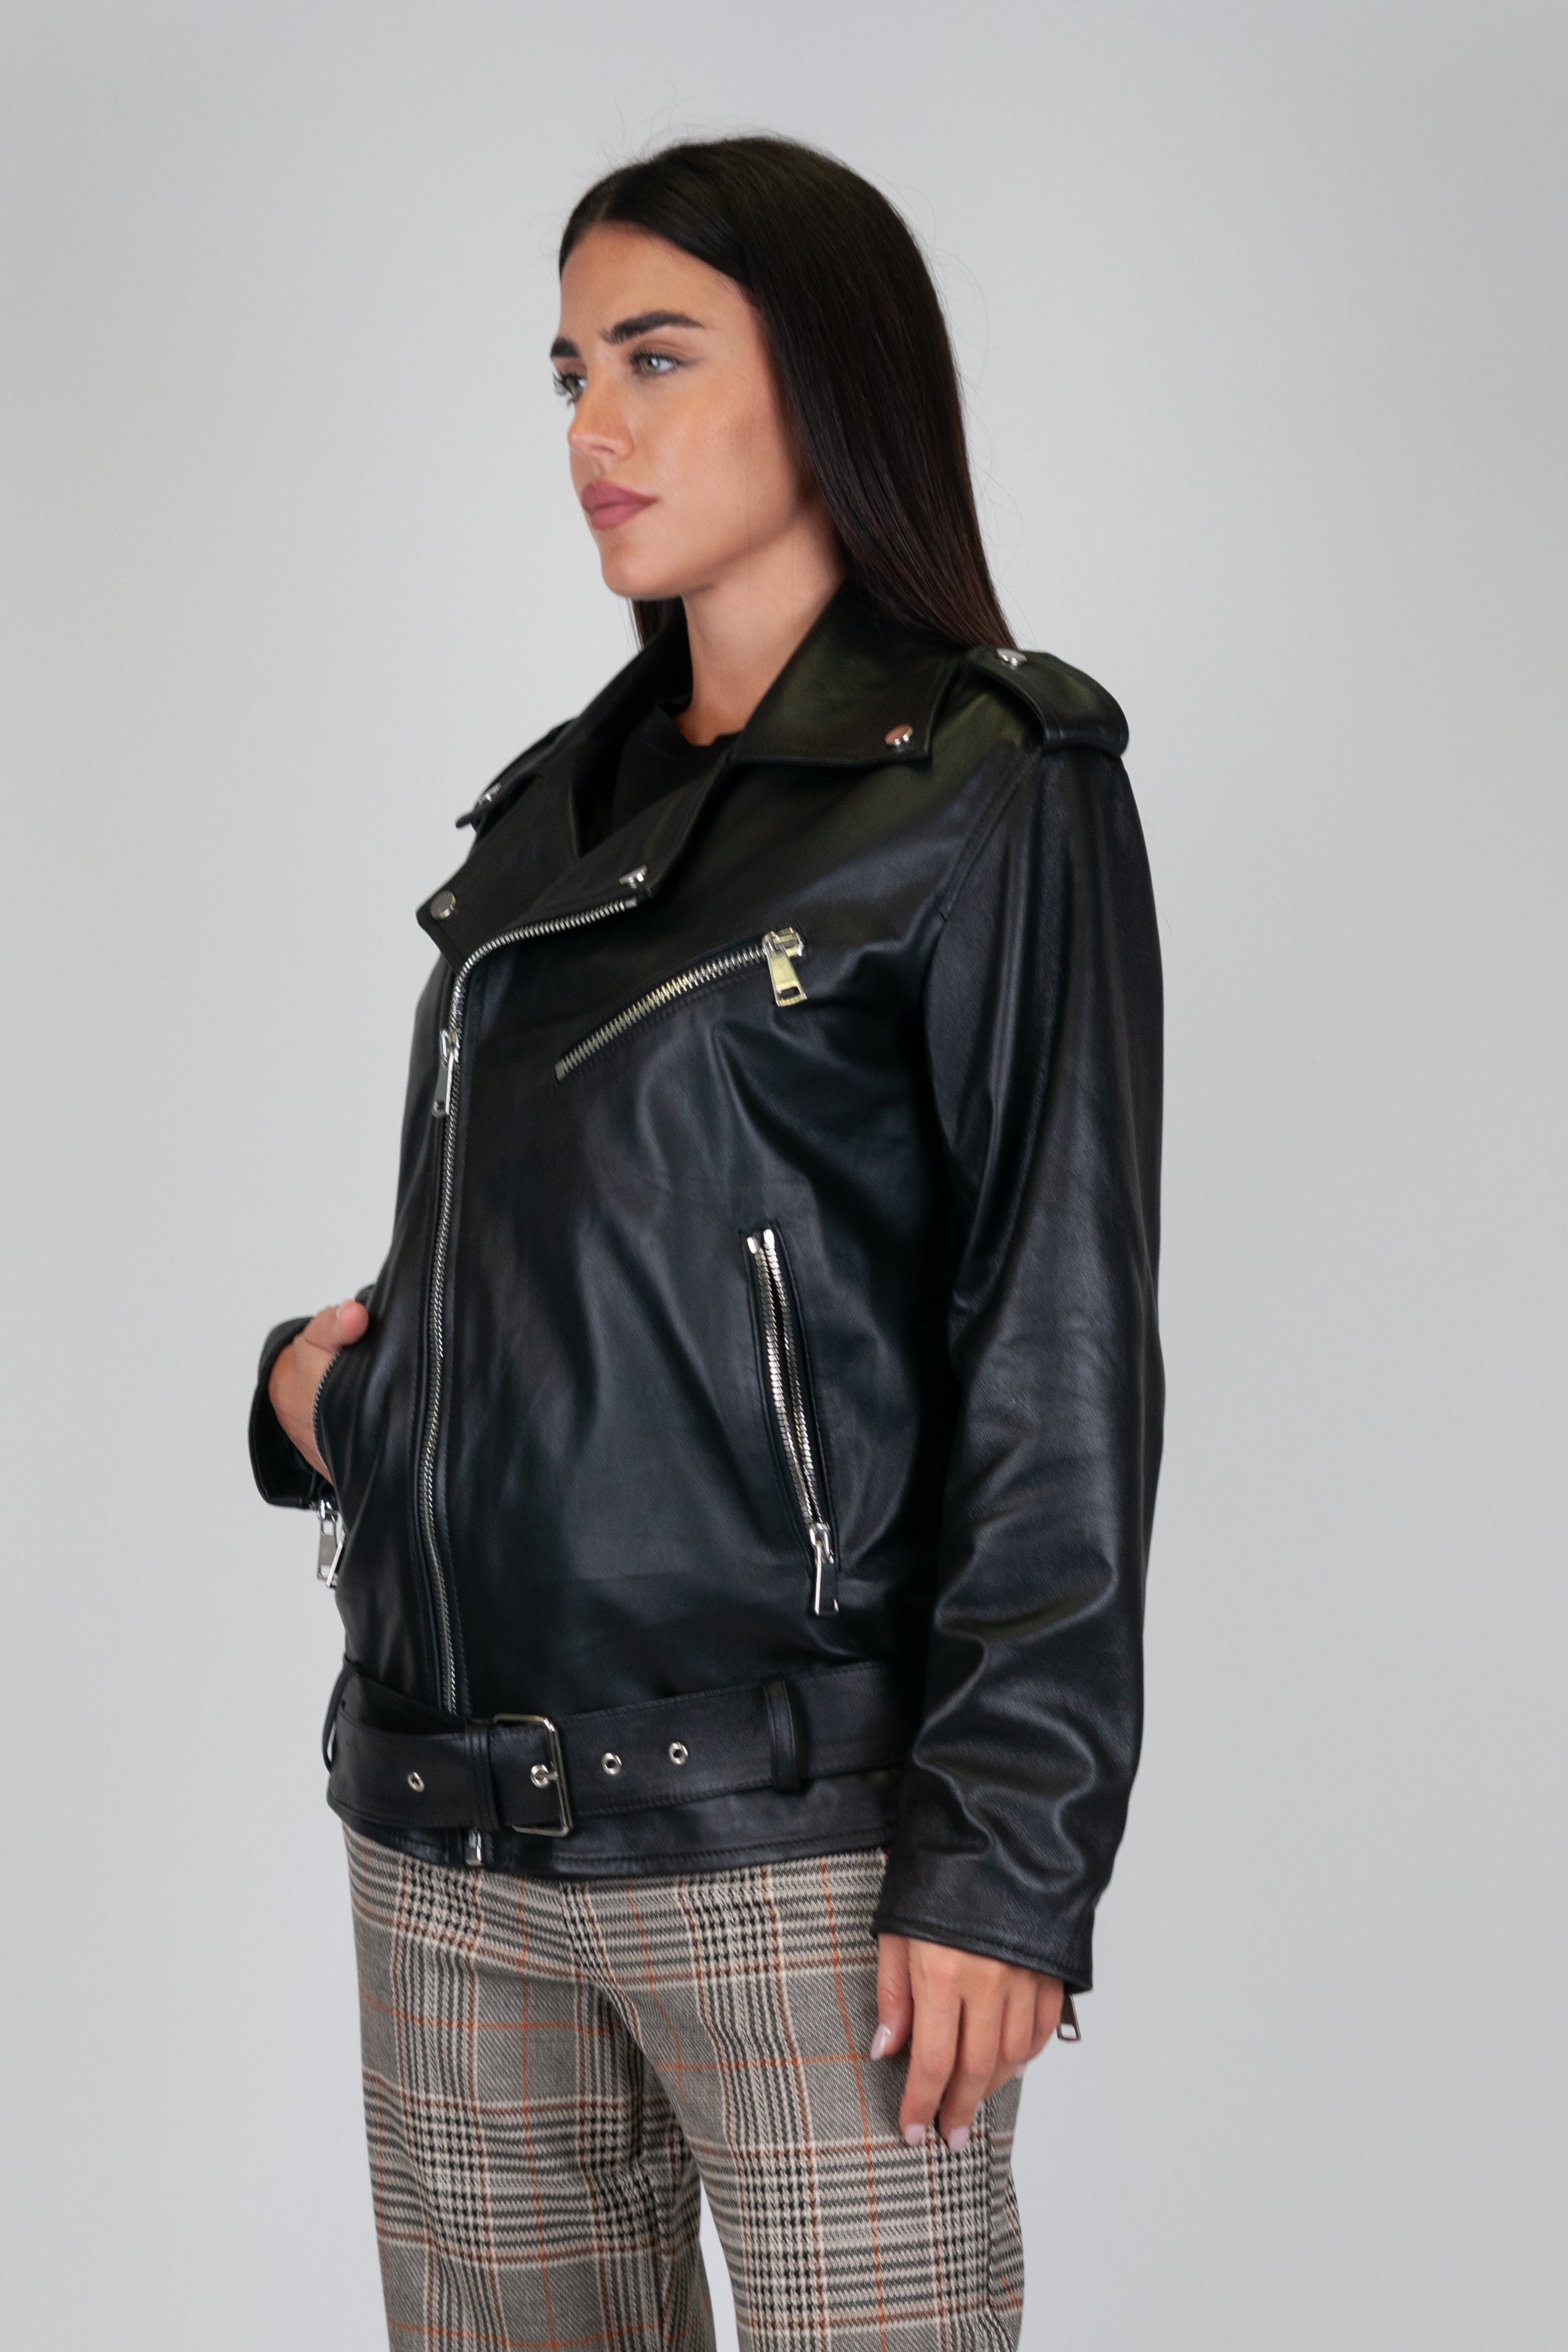 Motel - 100% real leather biker jacket with belt at the bottom